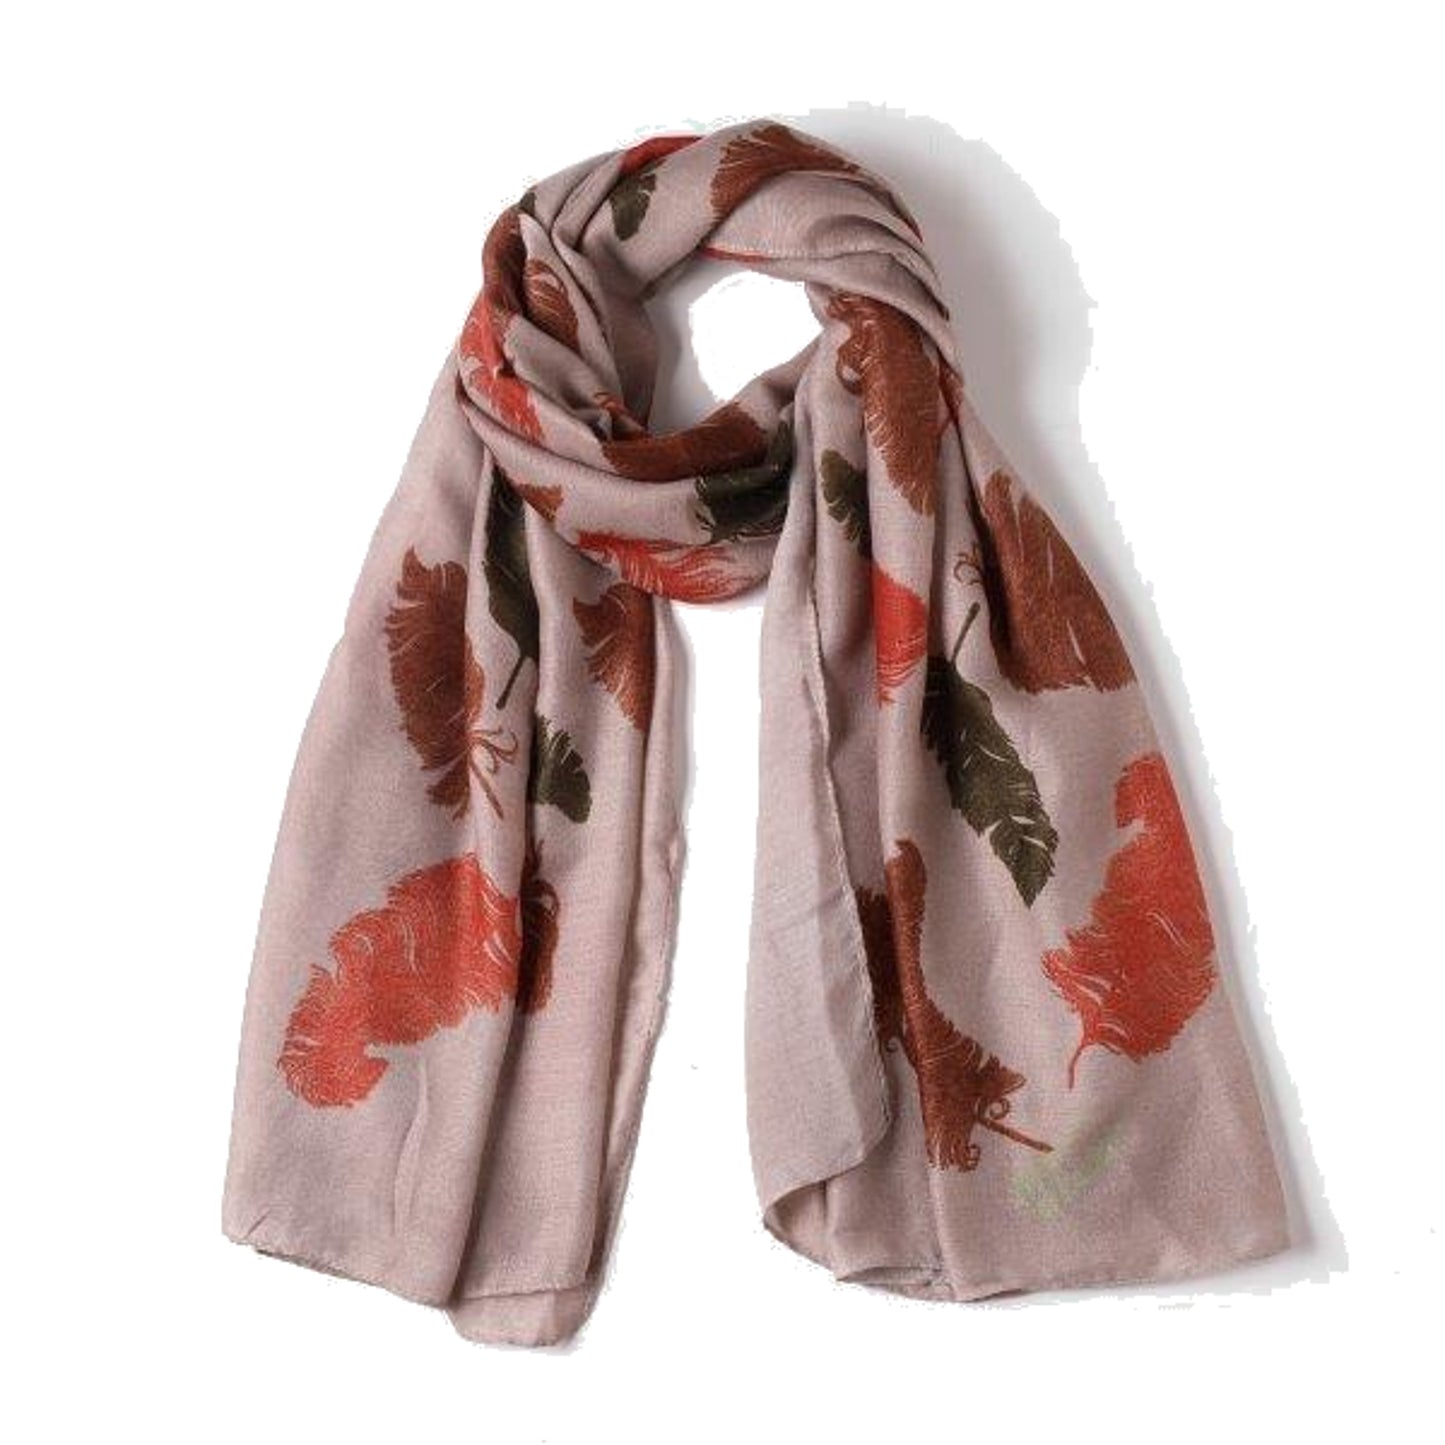 Lou Beige/Feather Print Scarf Made From Recycled Bottles